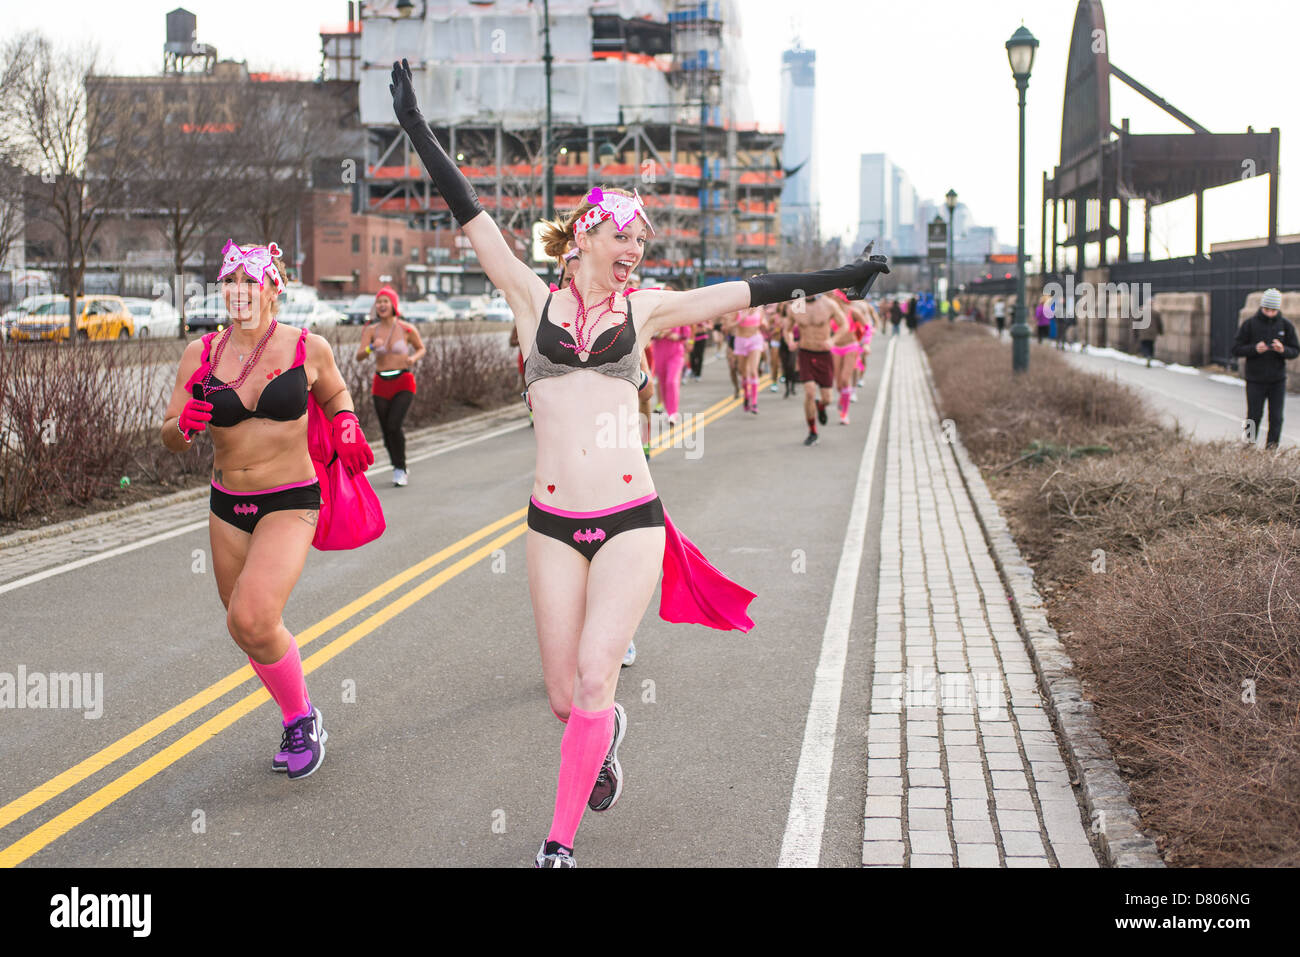 Participants in Cupid's Undie Run, a benefit for the Children's Tumor Foundation. Manhattan, NYC, Feb. 16, 2013. Stock Photo